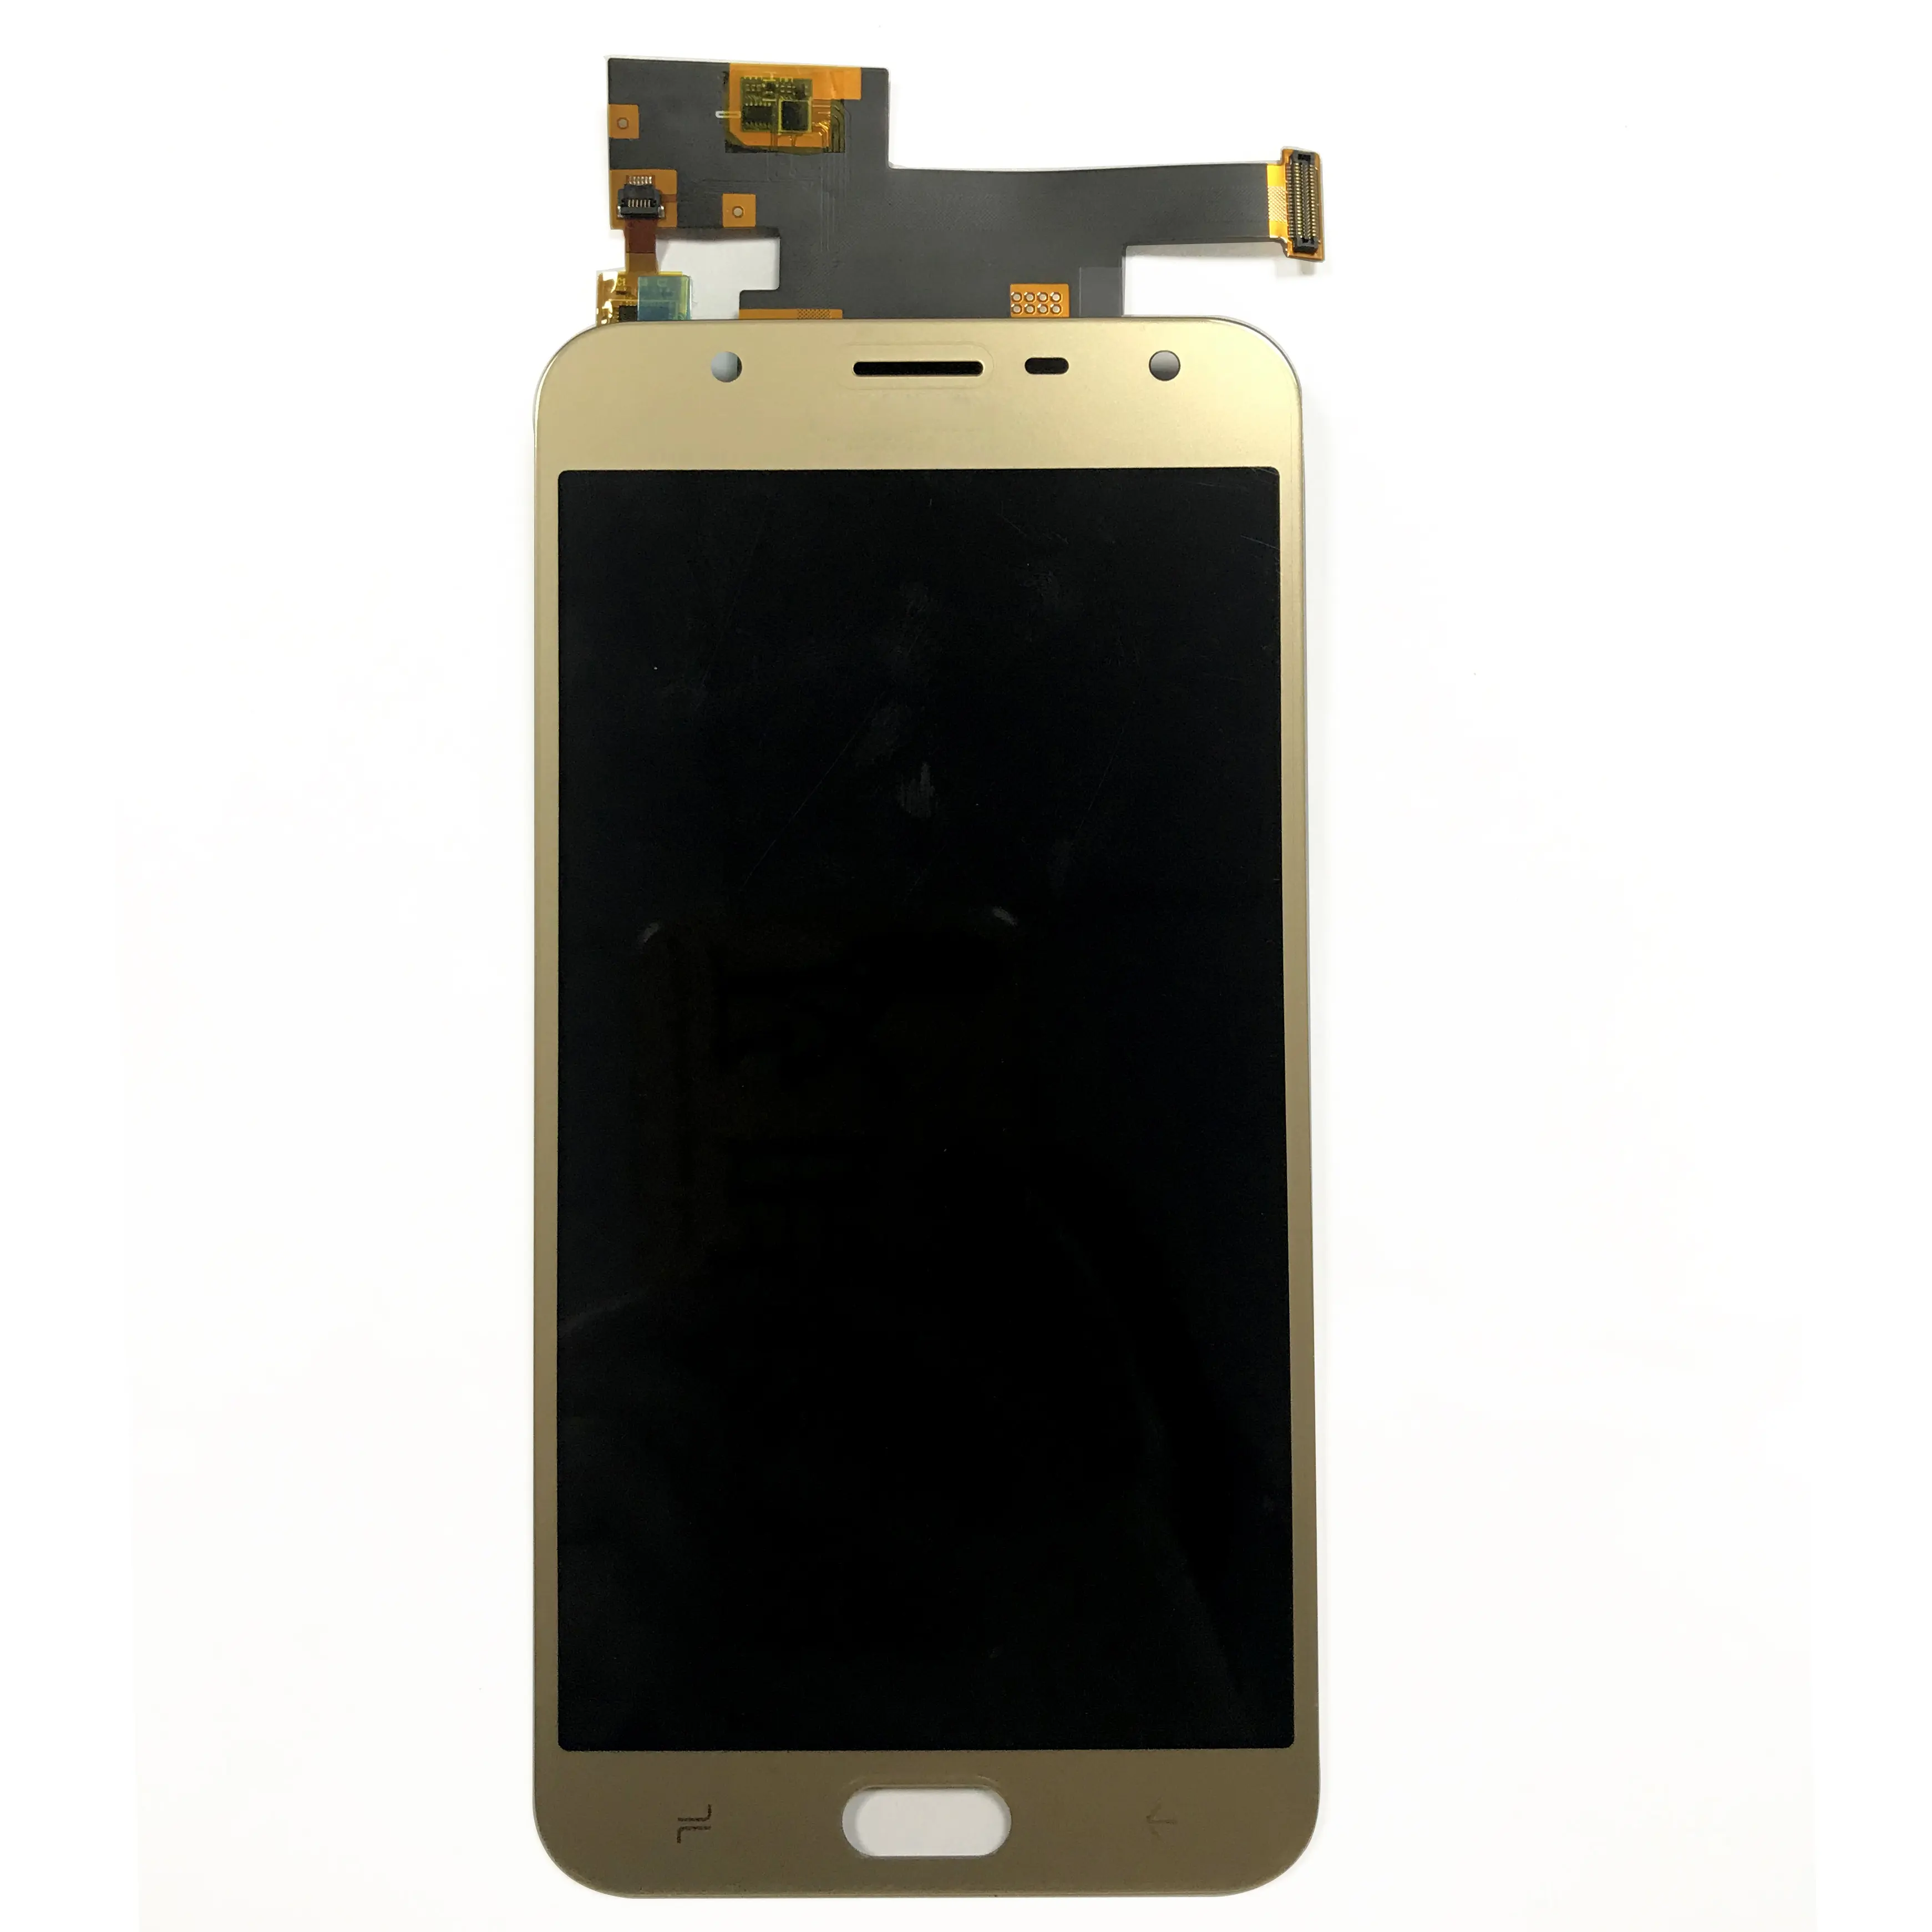 Cheap price mobile phone replacement lcd screen For Samsung J720 Lcd